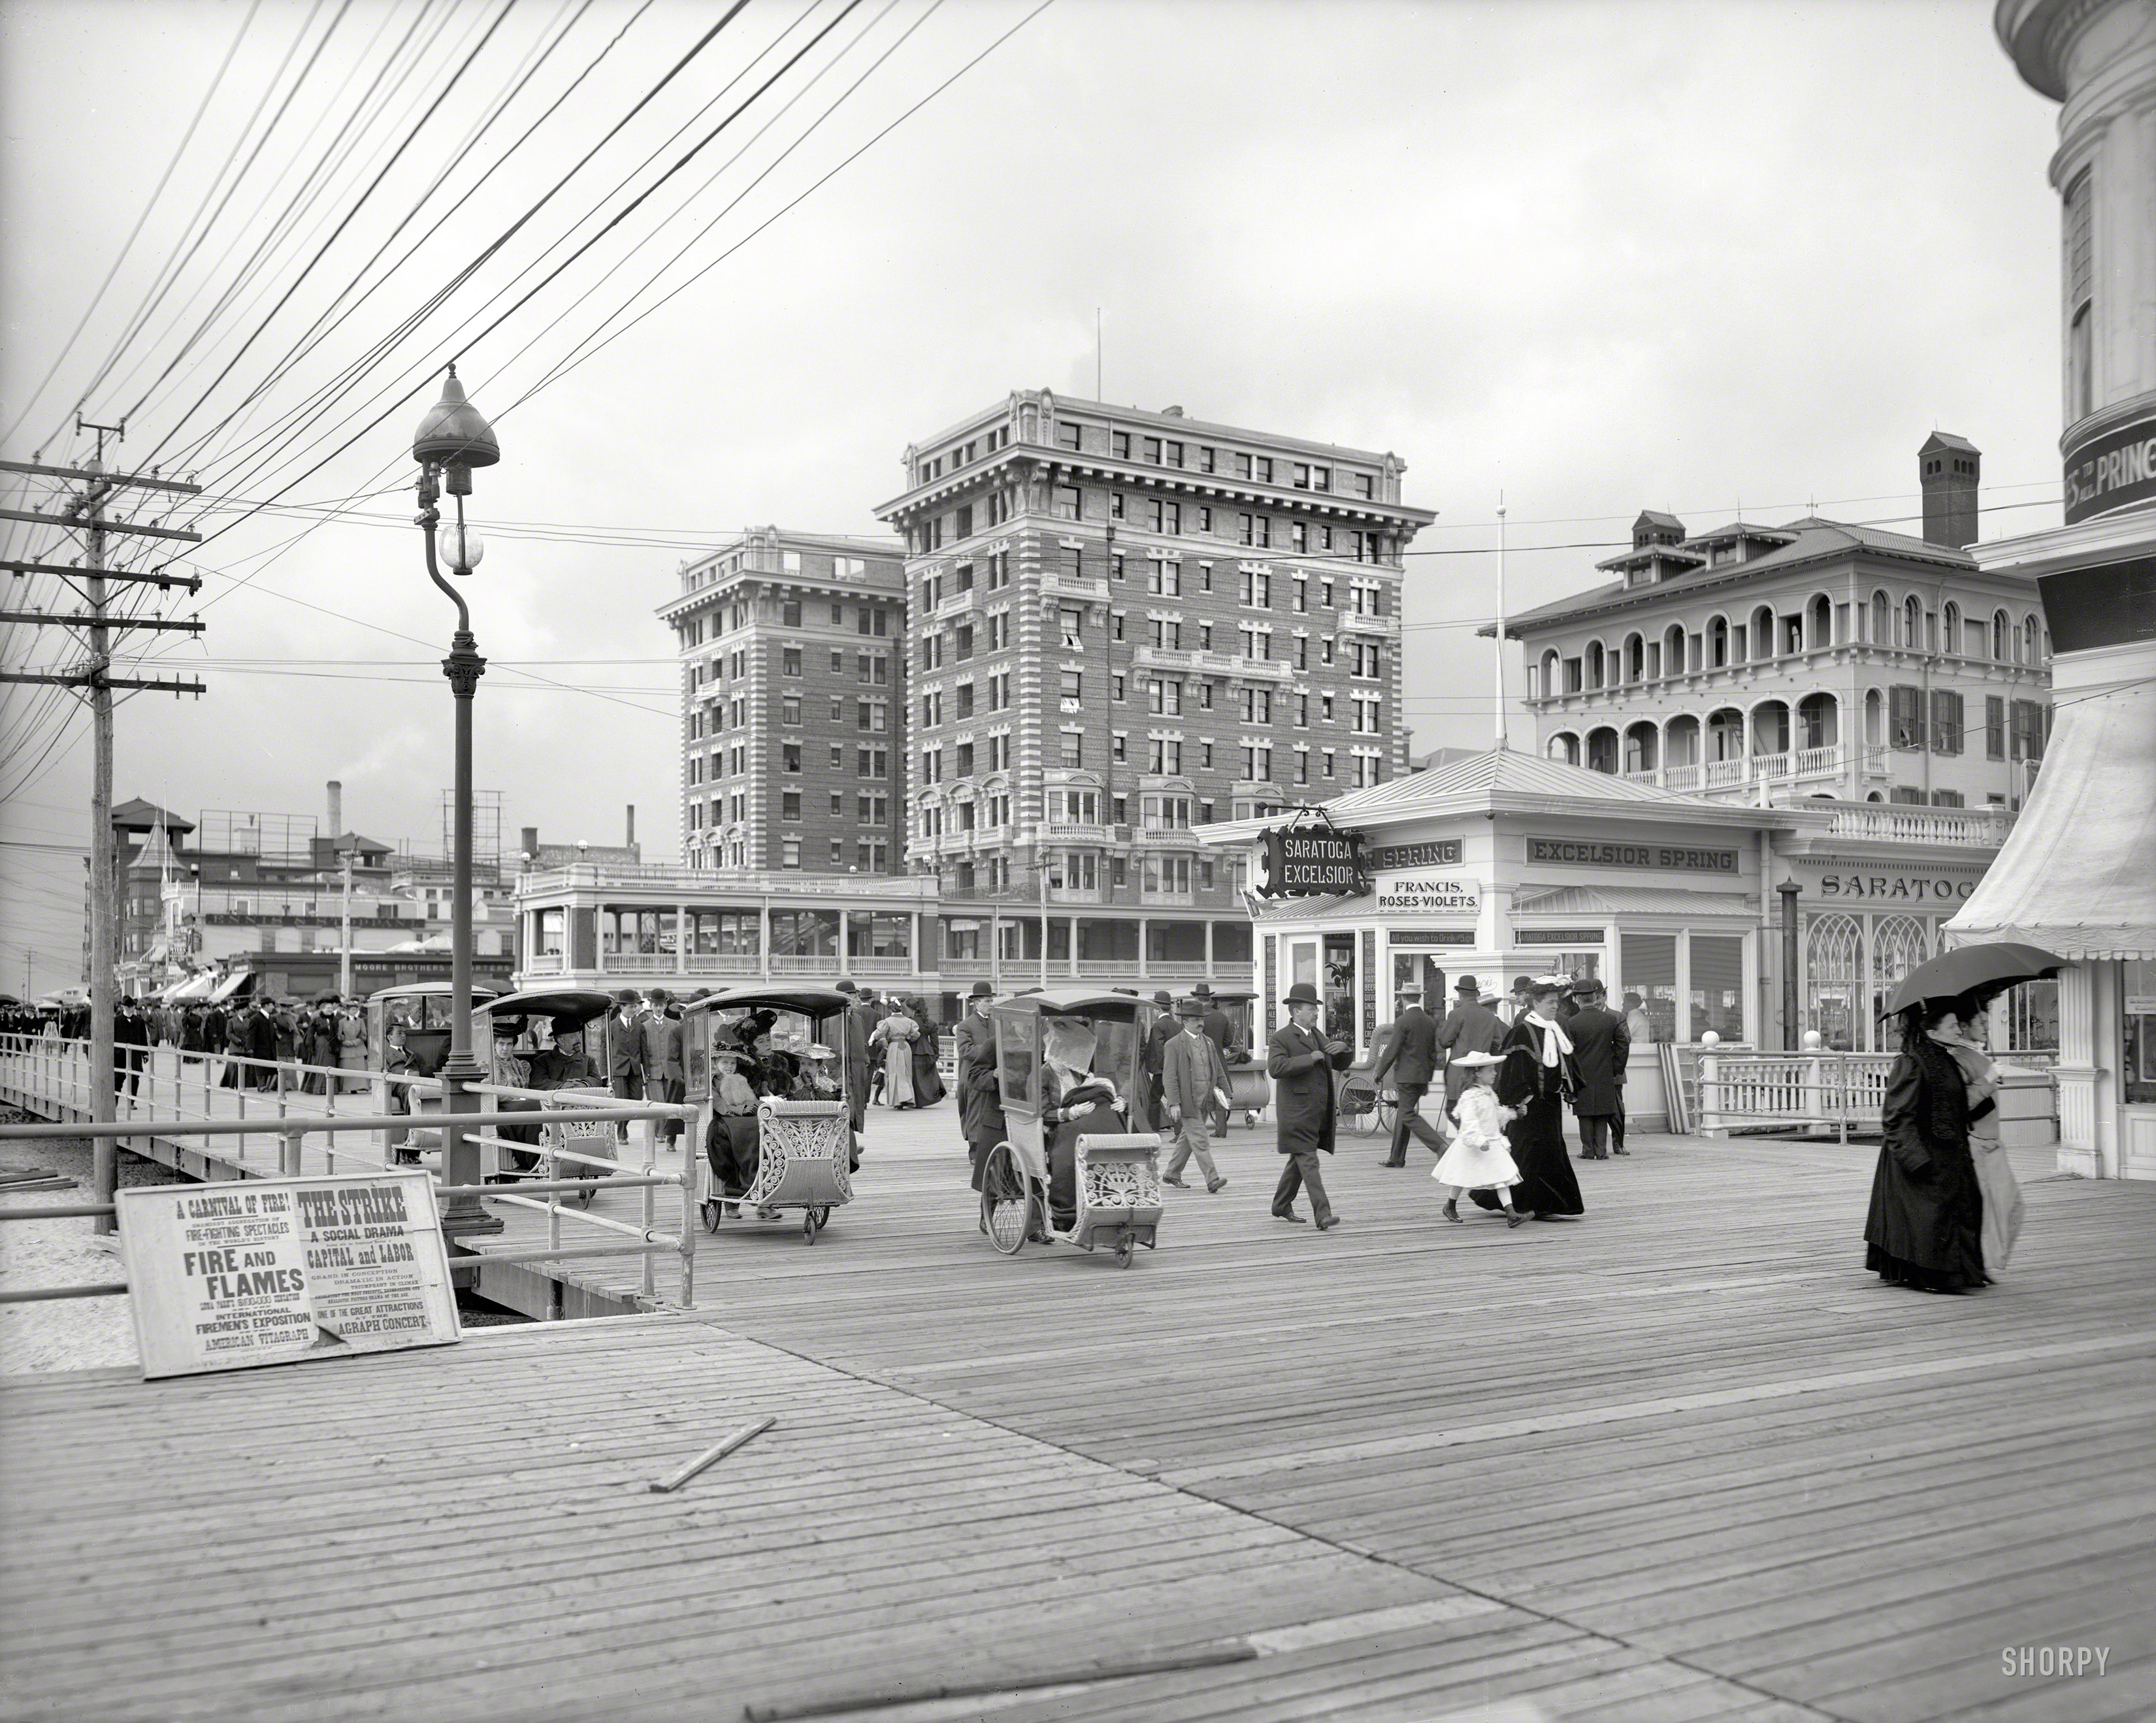 Atlantic City circa 1905. "Hotel Chalfonte and Boardwalk." Where the diversions include shooting flames, rolling chairs and "social drama." 8x10 inch dry plate glass negative, Detroit Publishing Company. View full size.